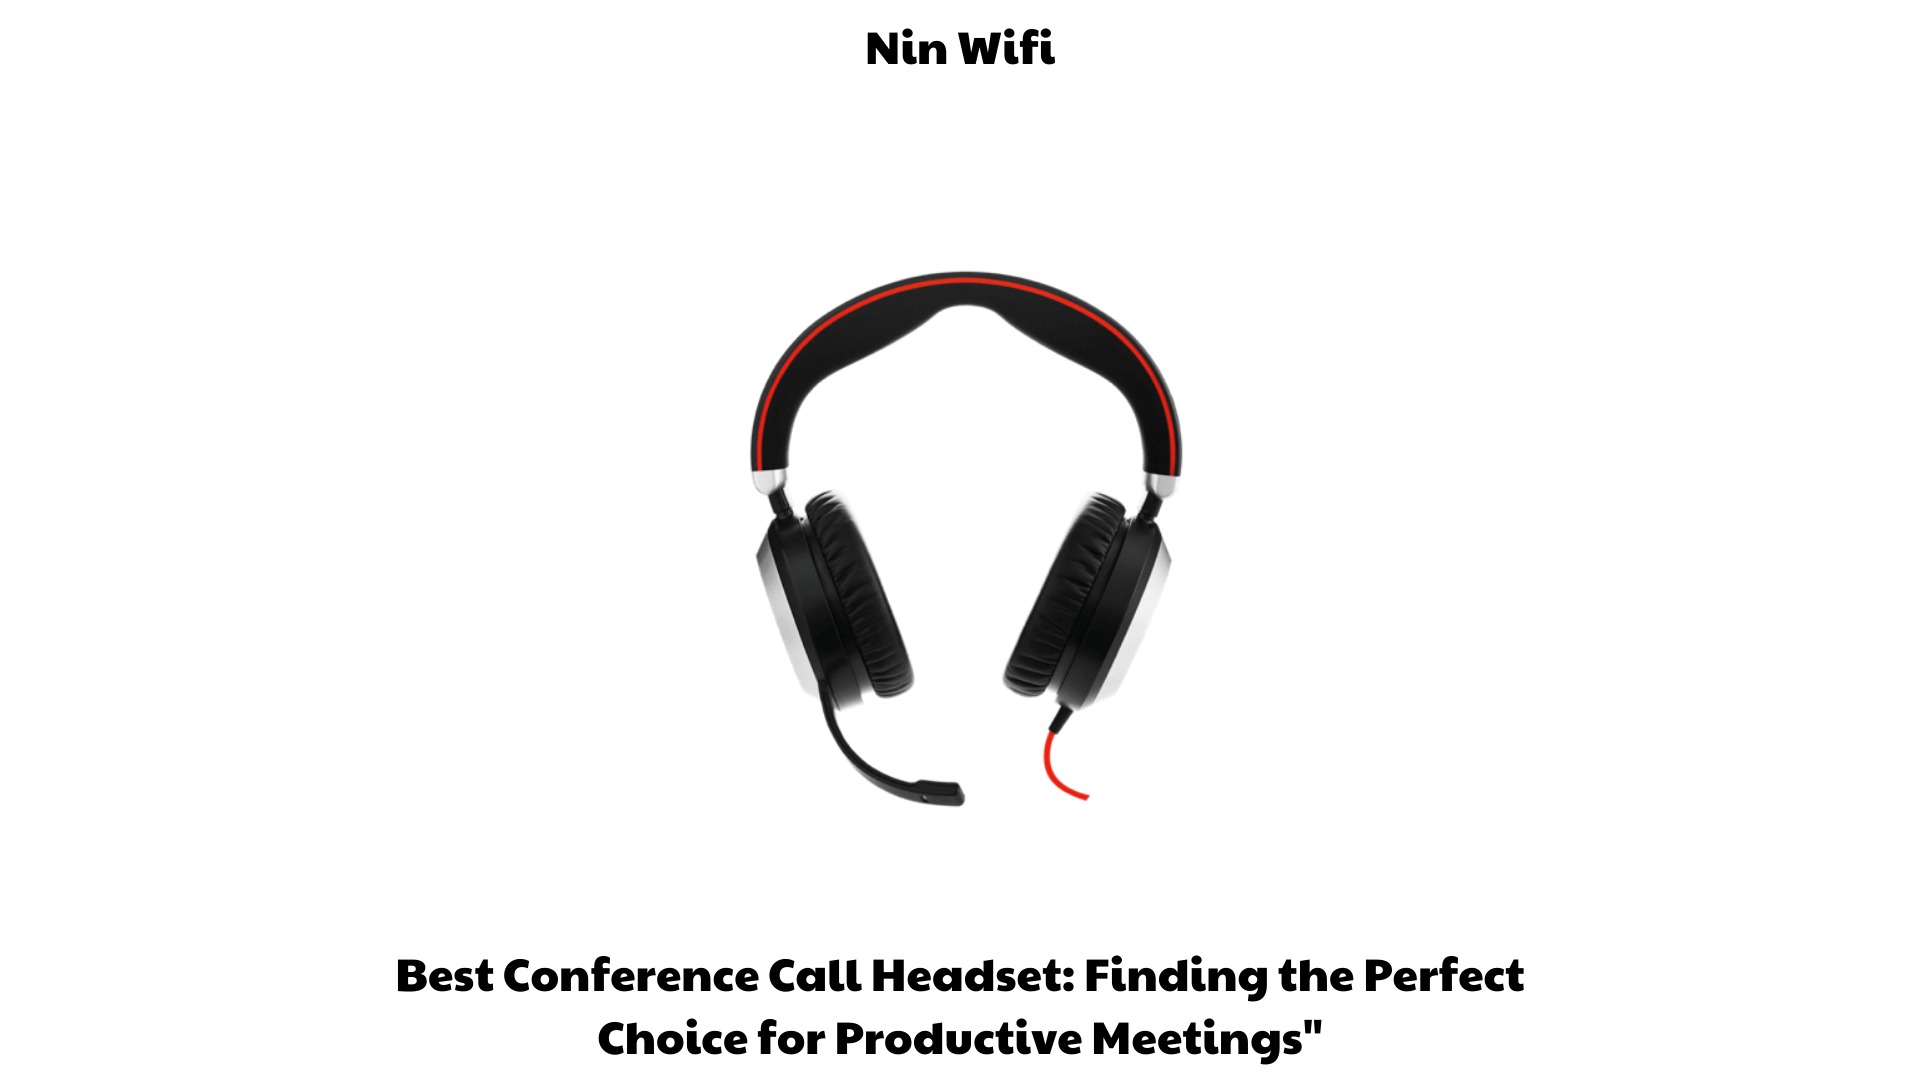 Best Conference Call Headset Finding the Perfect Choice for Productive Meetings